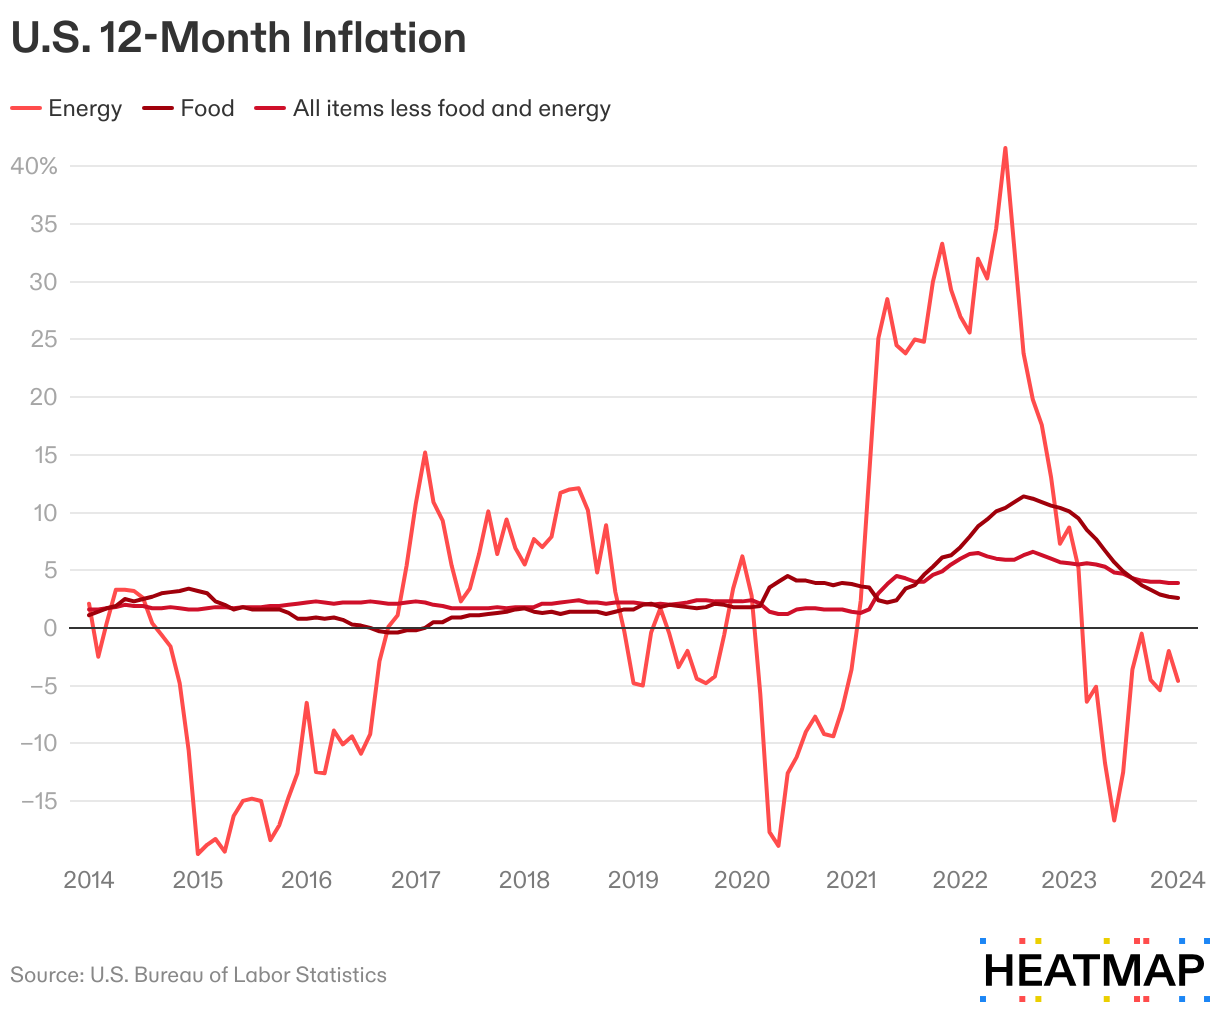 A chart of US inflation from 2014 to 2024